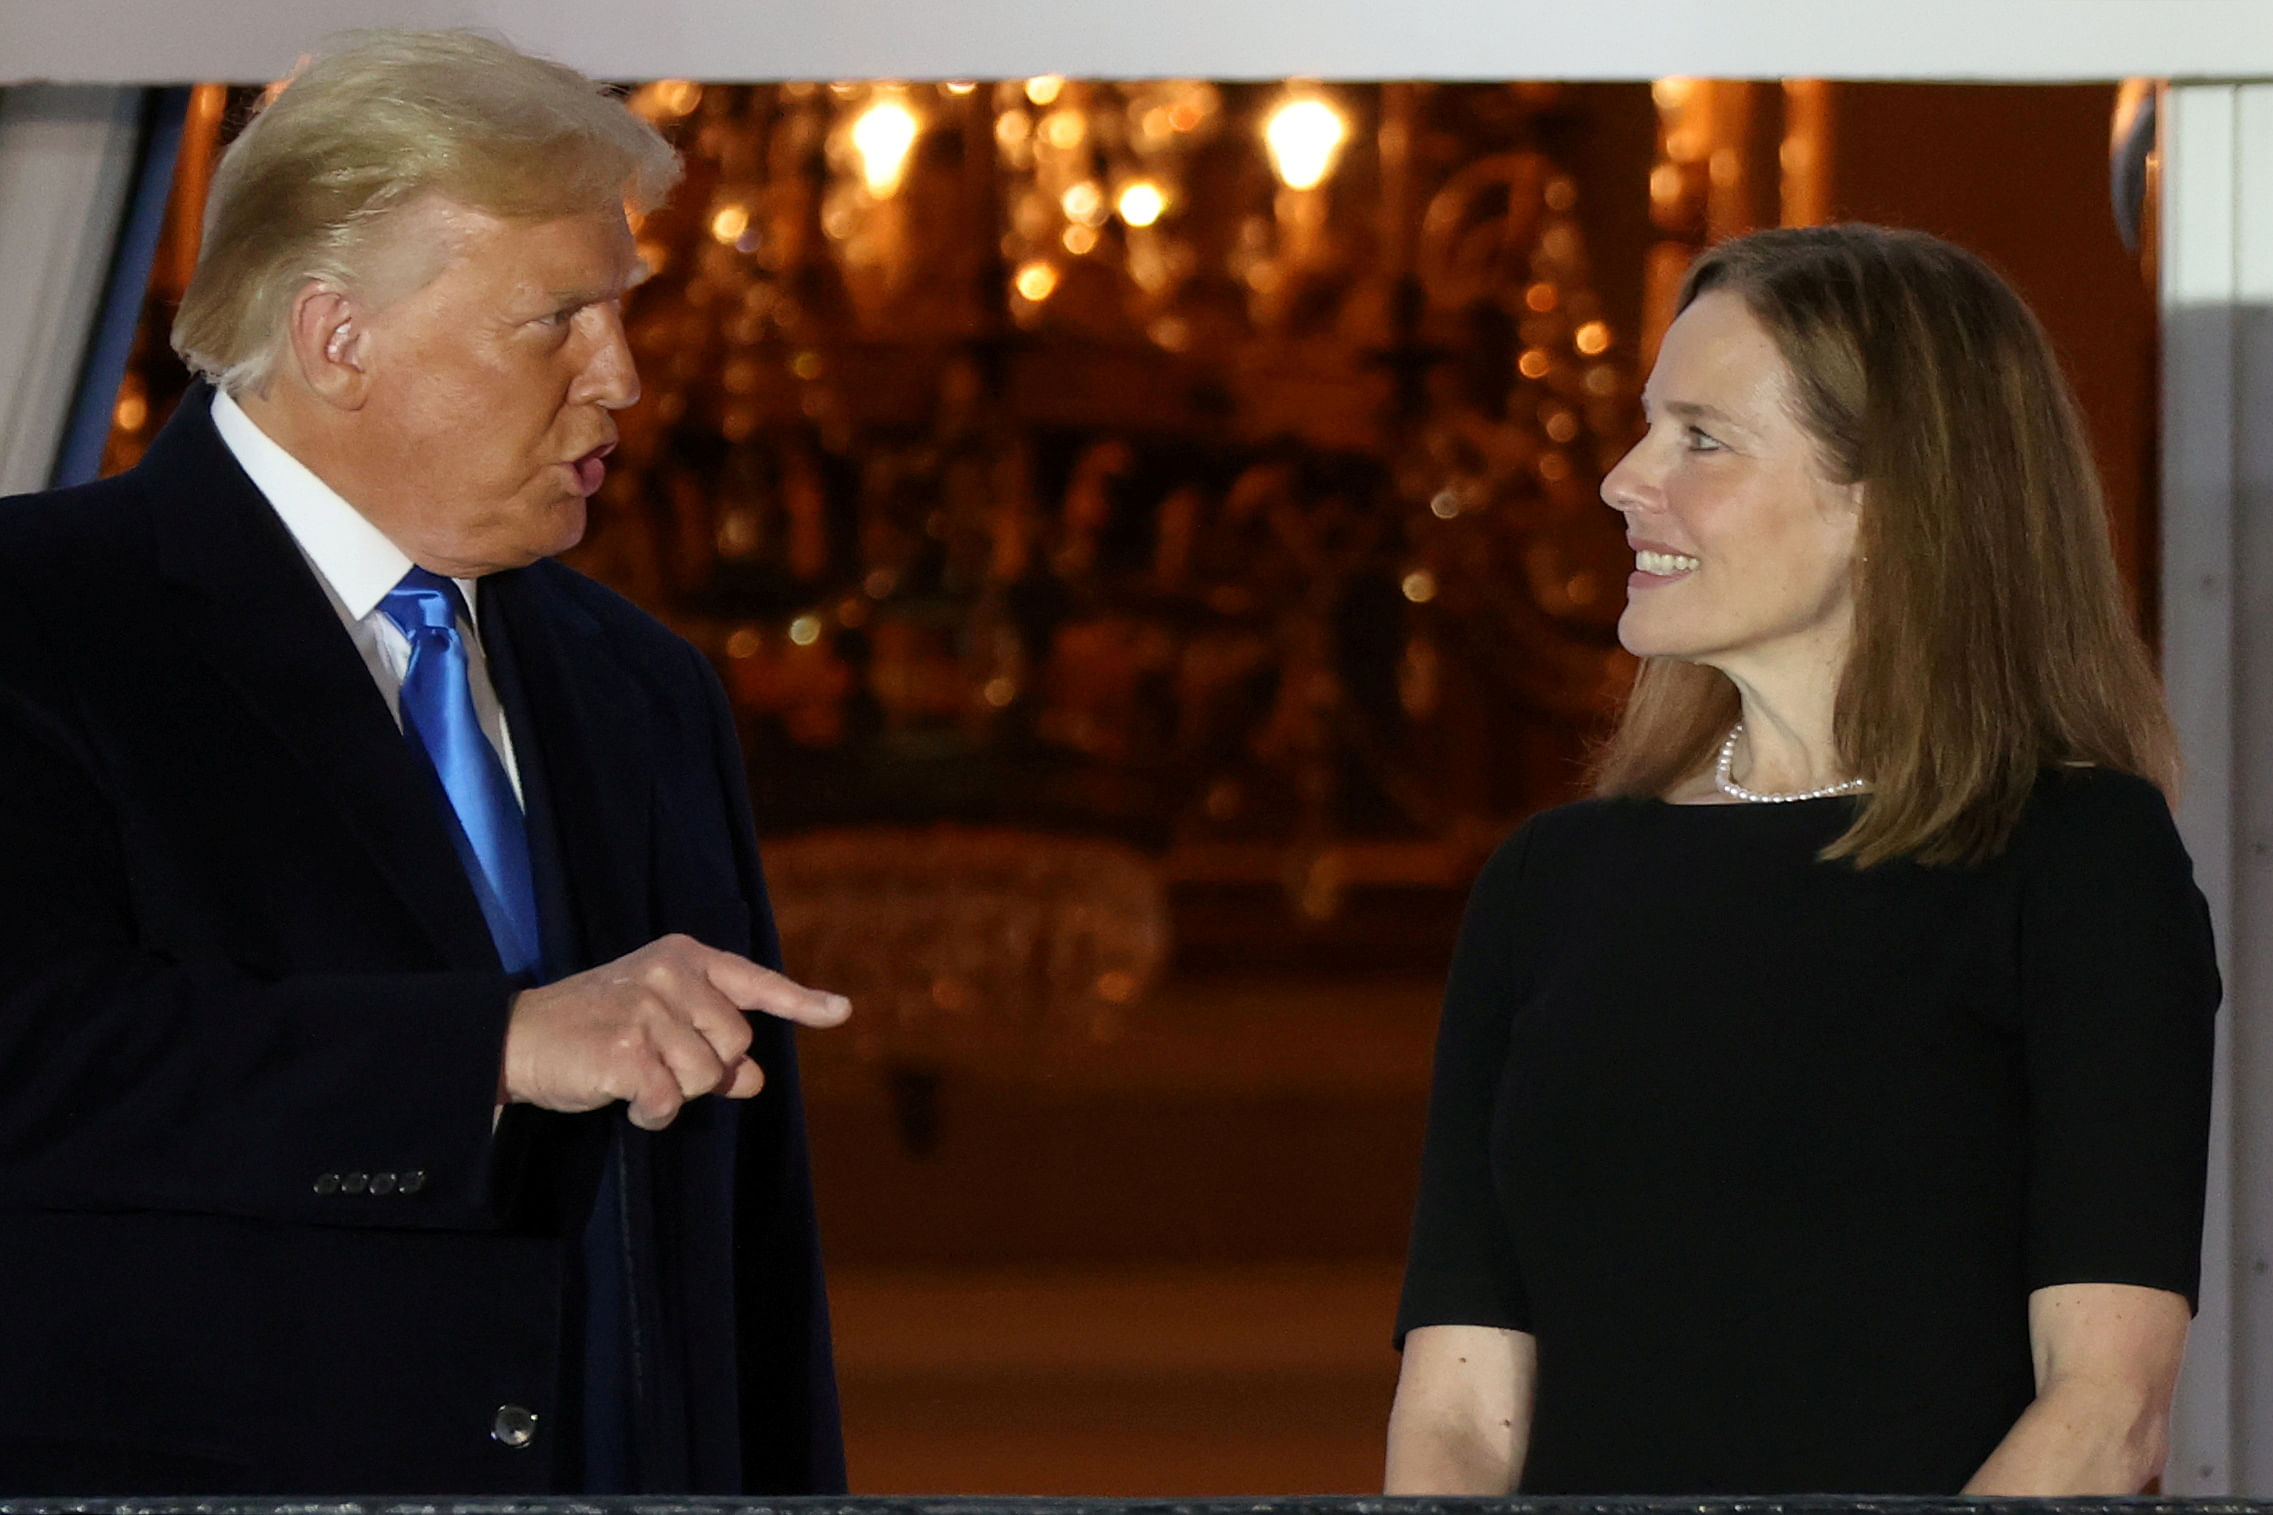 US President Donald Trump speaks with Judge Amy Coney Barrett after she was sworn in as an associate justice of the U.S. Supreme Court on the South Lawn of the White House in Washington, US October 26, 2020. Credit: REUTERS